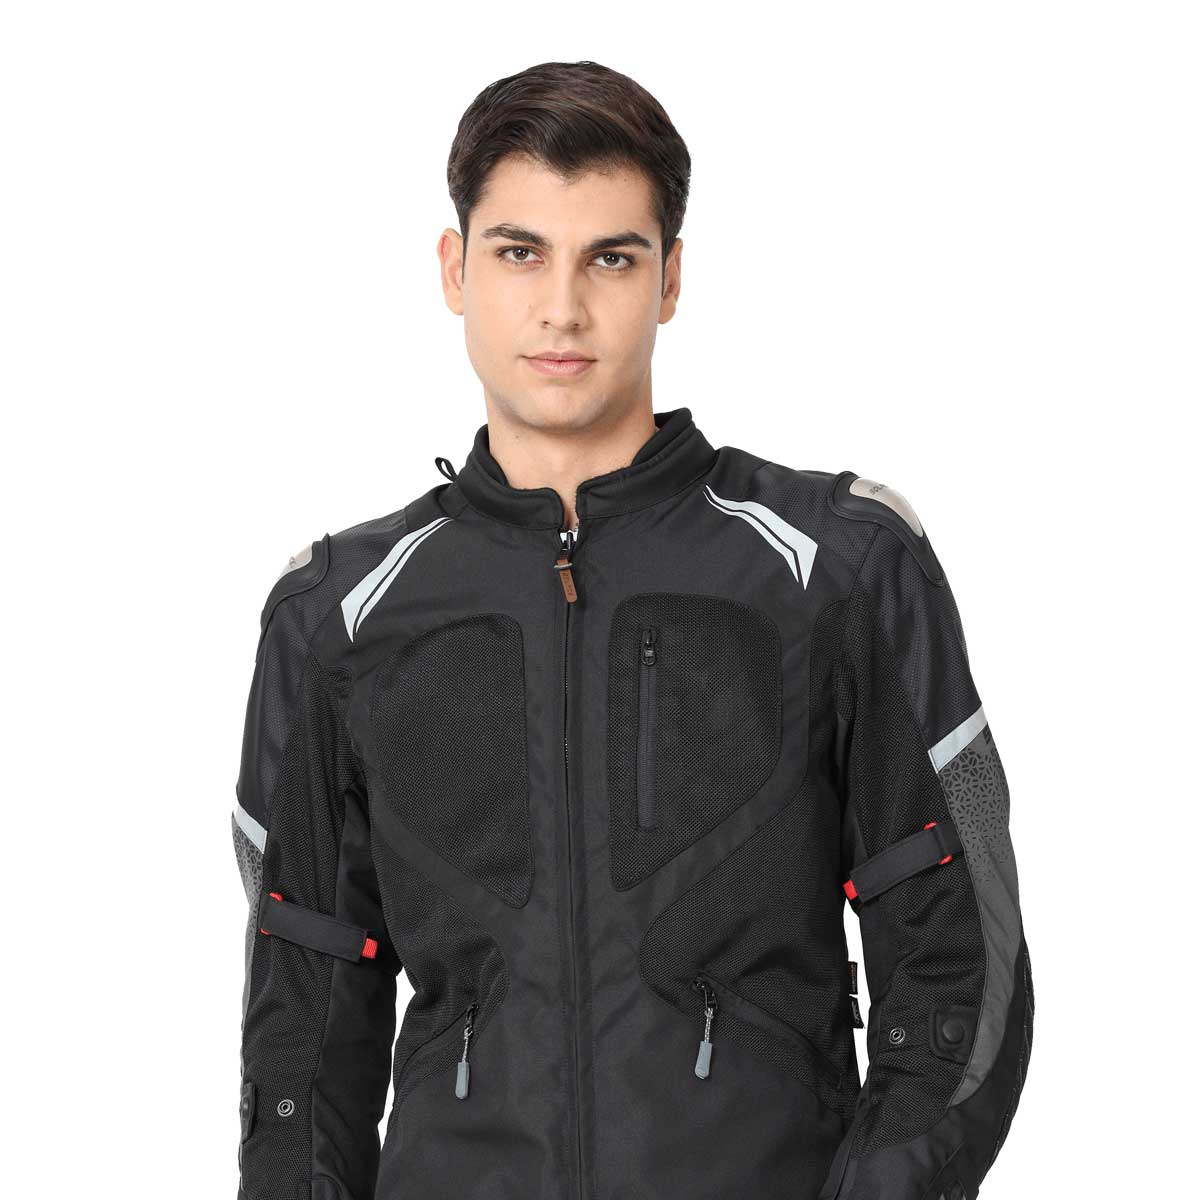 Textile Jackets Manufacturers in Syktyvkar